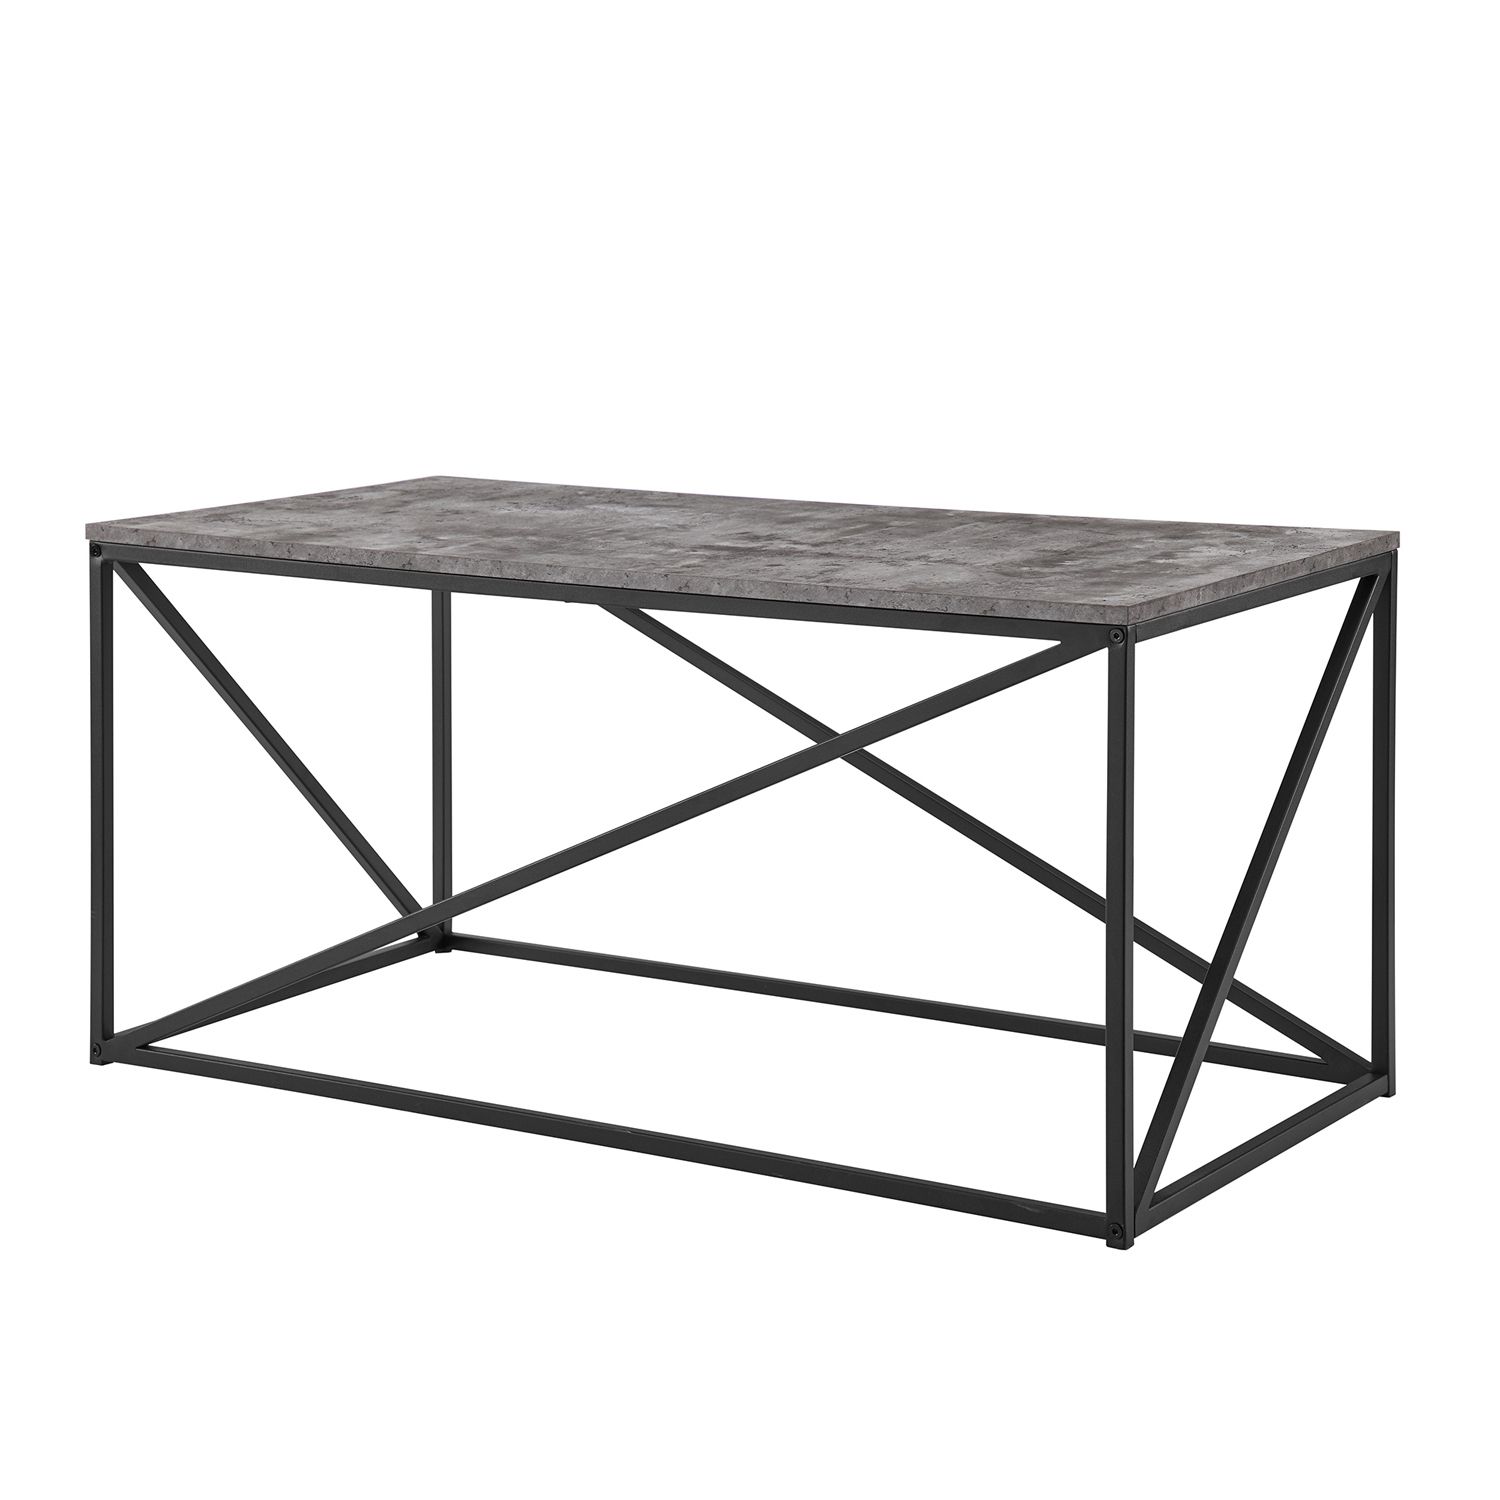 Widely Used Modern Geometric Dark Gray Coffee Table – Pier1 For White Geometric Coffee Tables (View 4 of 10)